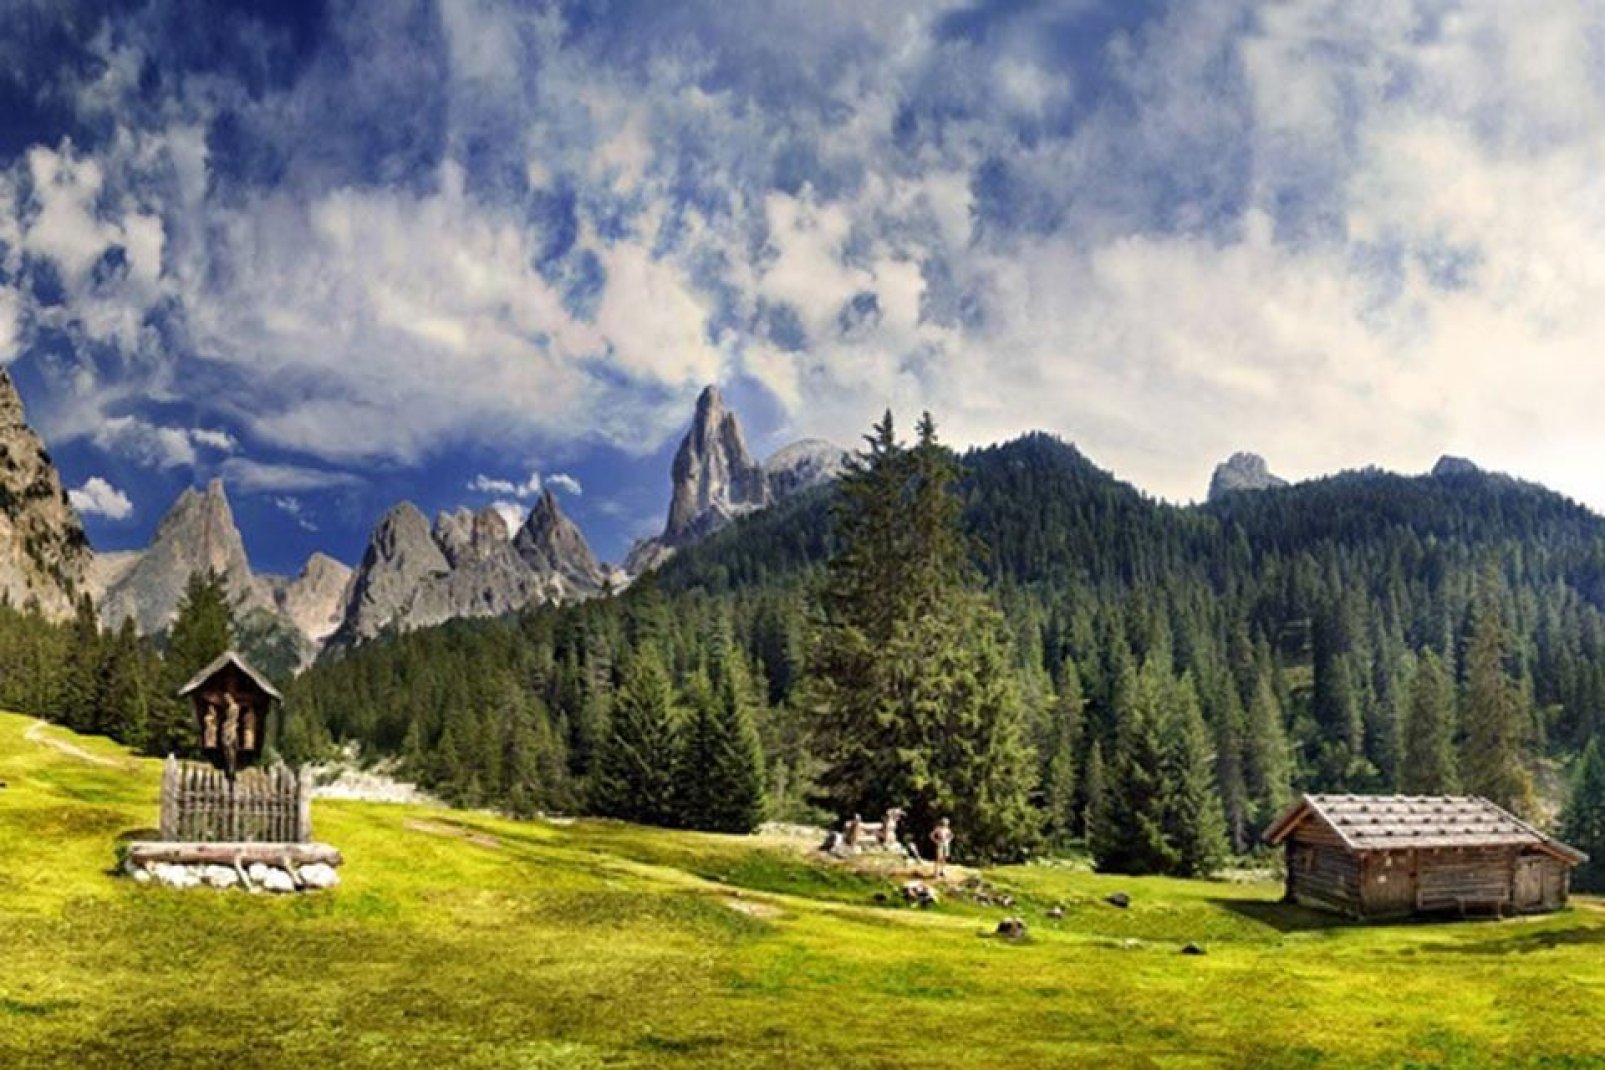 The Dolomites, a mountain range located between Belluno and Pordenone, are listed as a UNESCO World Heritage site